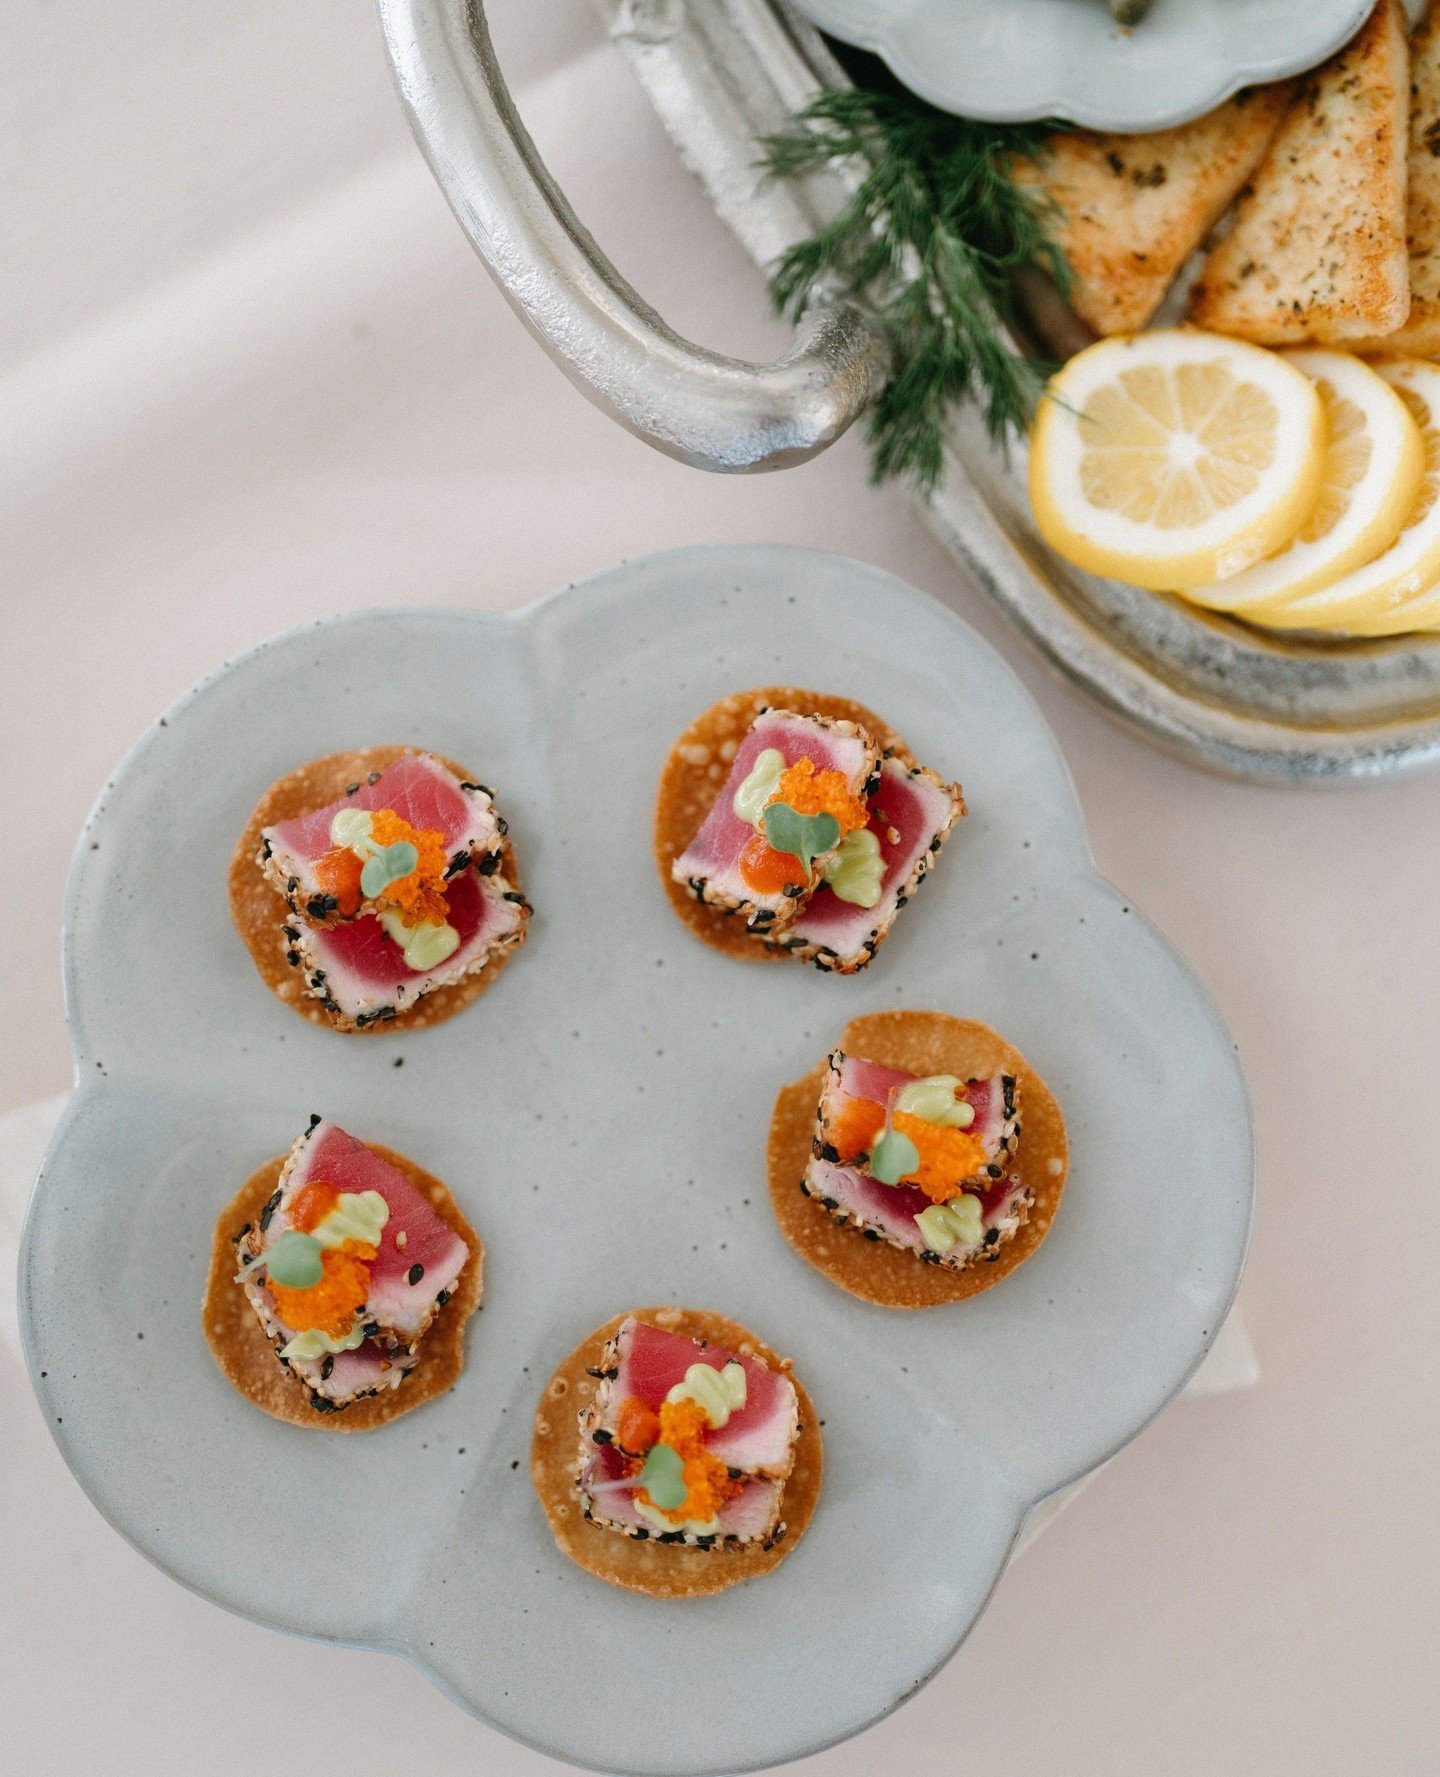 Bite sized deliciousness- a wonton chip topped with flavorful black sesame seared tuna, zesty wasabi aioli, crunchy tobiko, and micro flowers 😋⁠
⁠
⁠
Design - @lunawilddesign⁠
Photo - @zoeisabelphotography⁠
drapery - @questevents_socal⁠
florals - @le